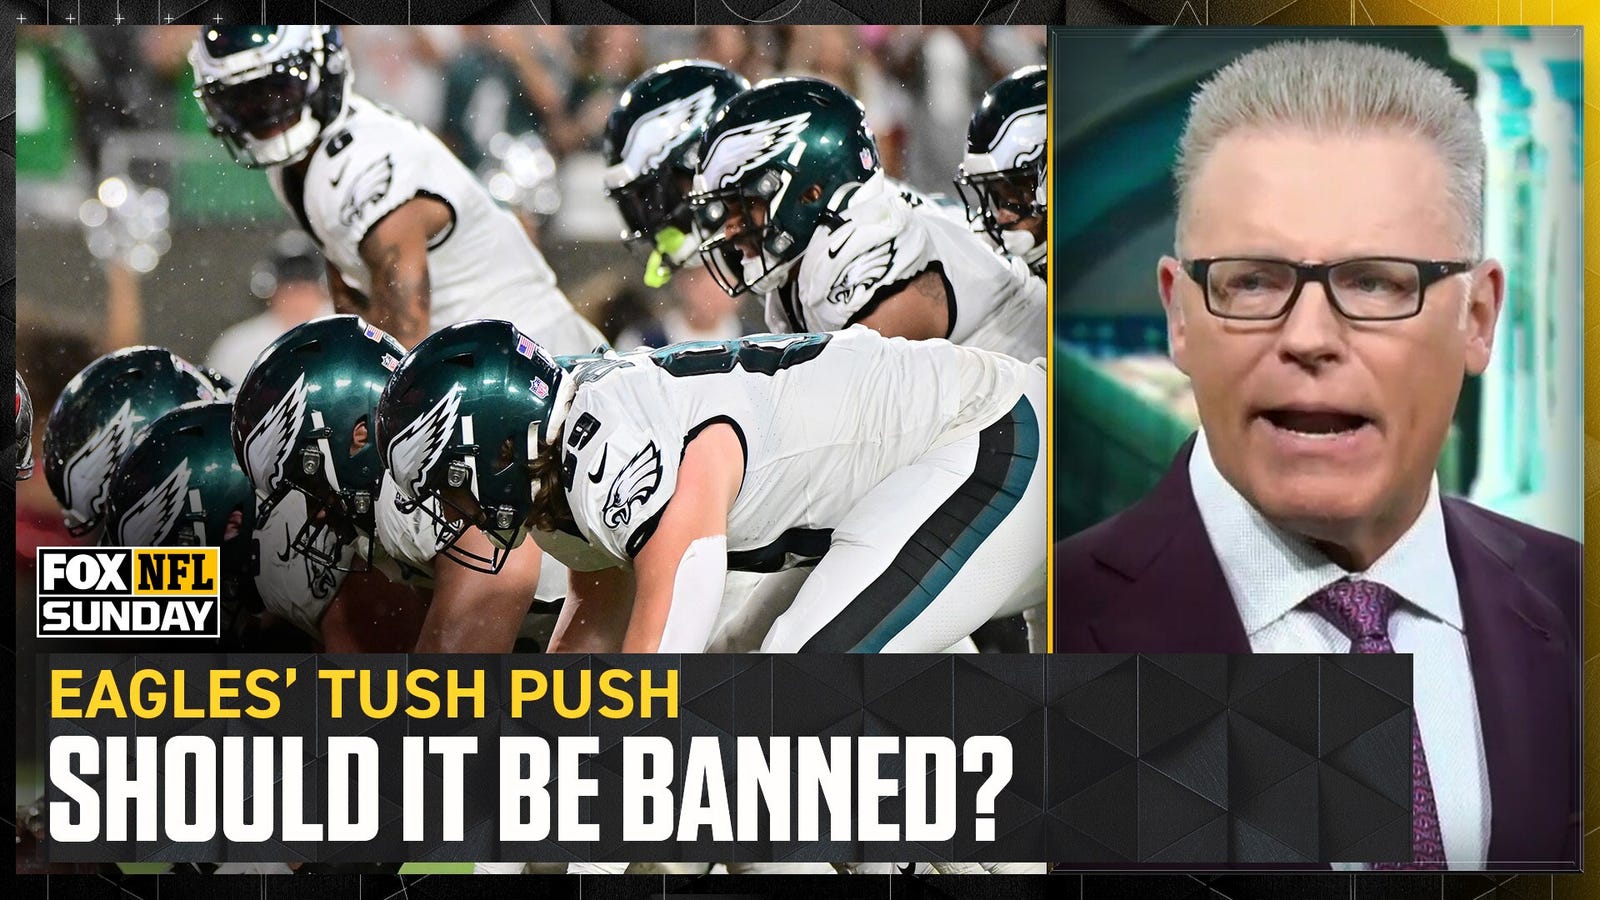 The 'FOX NFL Sunday' crew discuss the Eagles' 'tush push' and if it should be banned? 